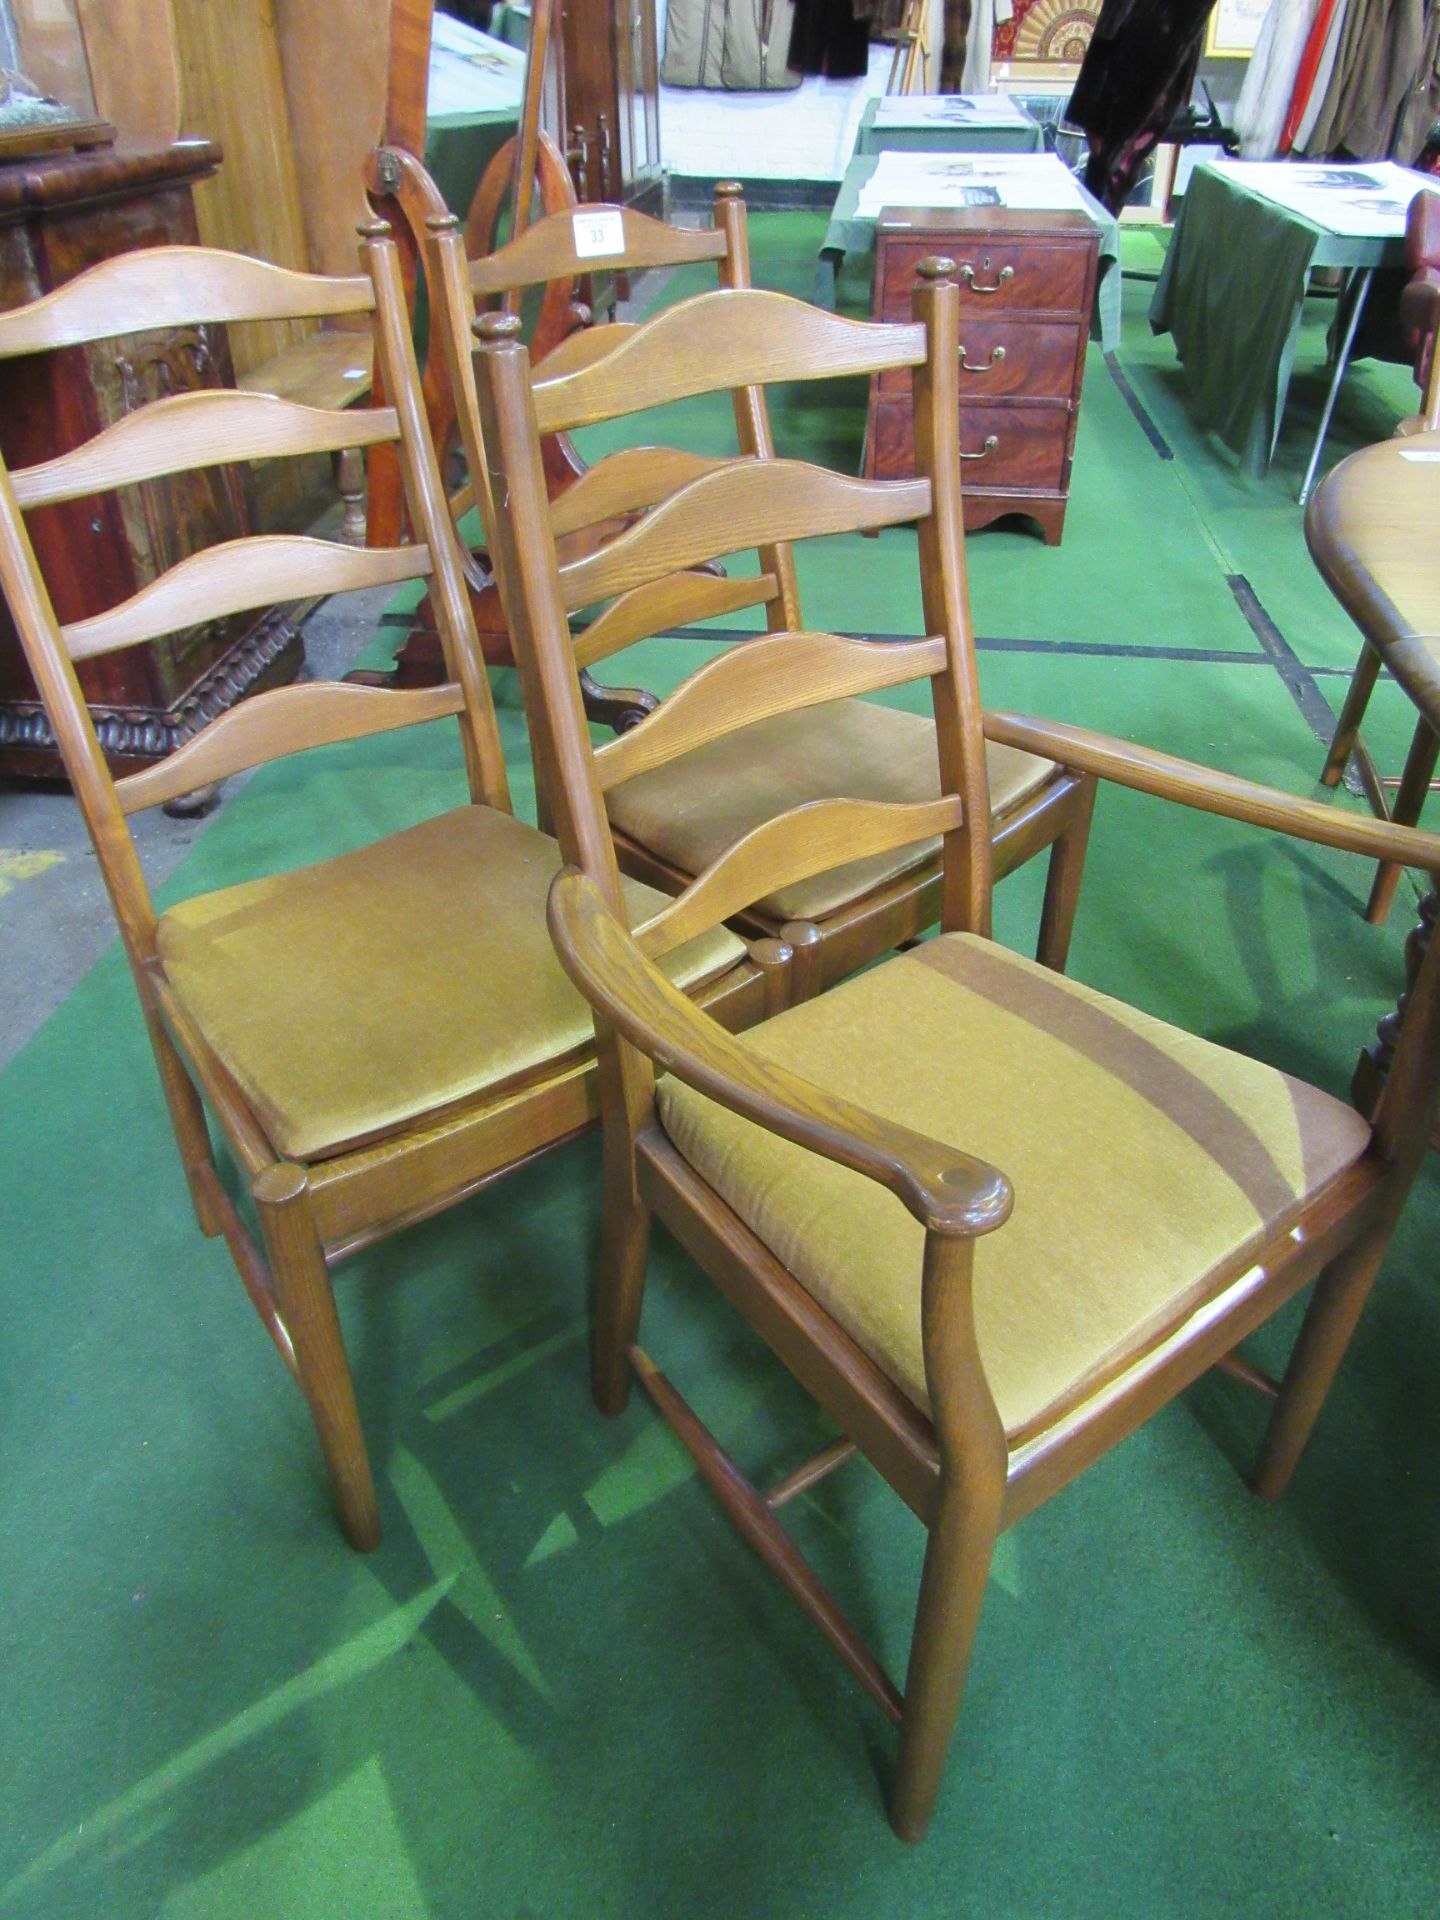 2 + 4 Ercol ladder back dining chairs to suit lot 32. Estimate £120-150.